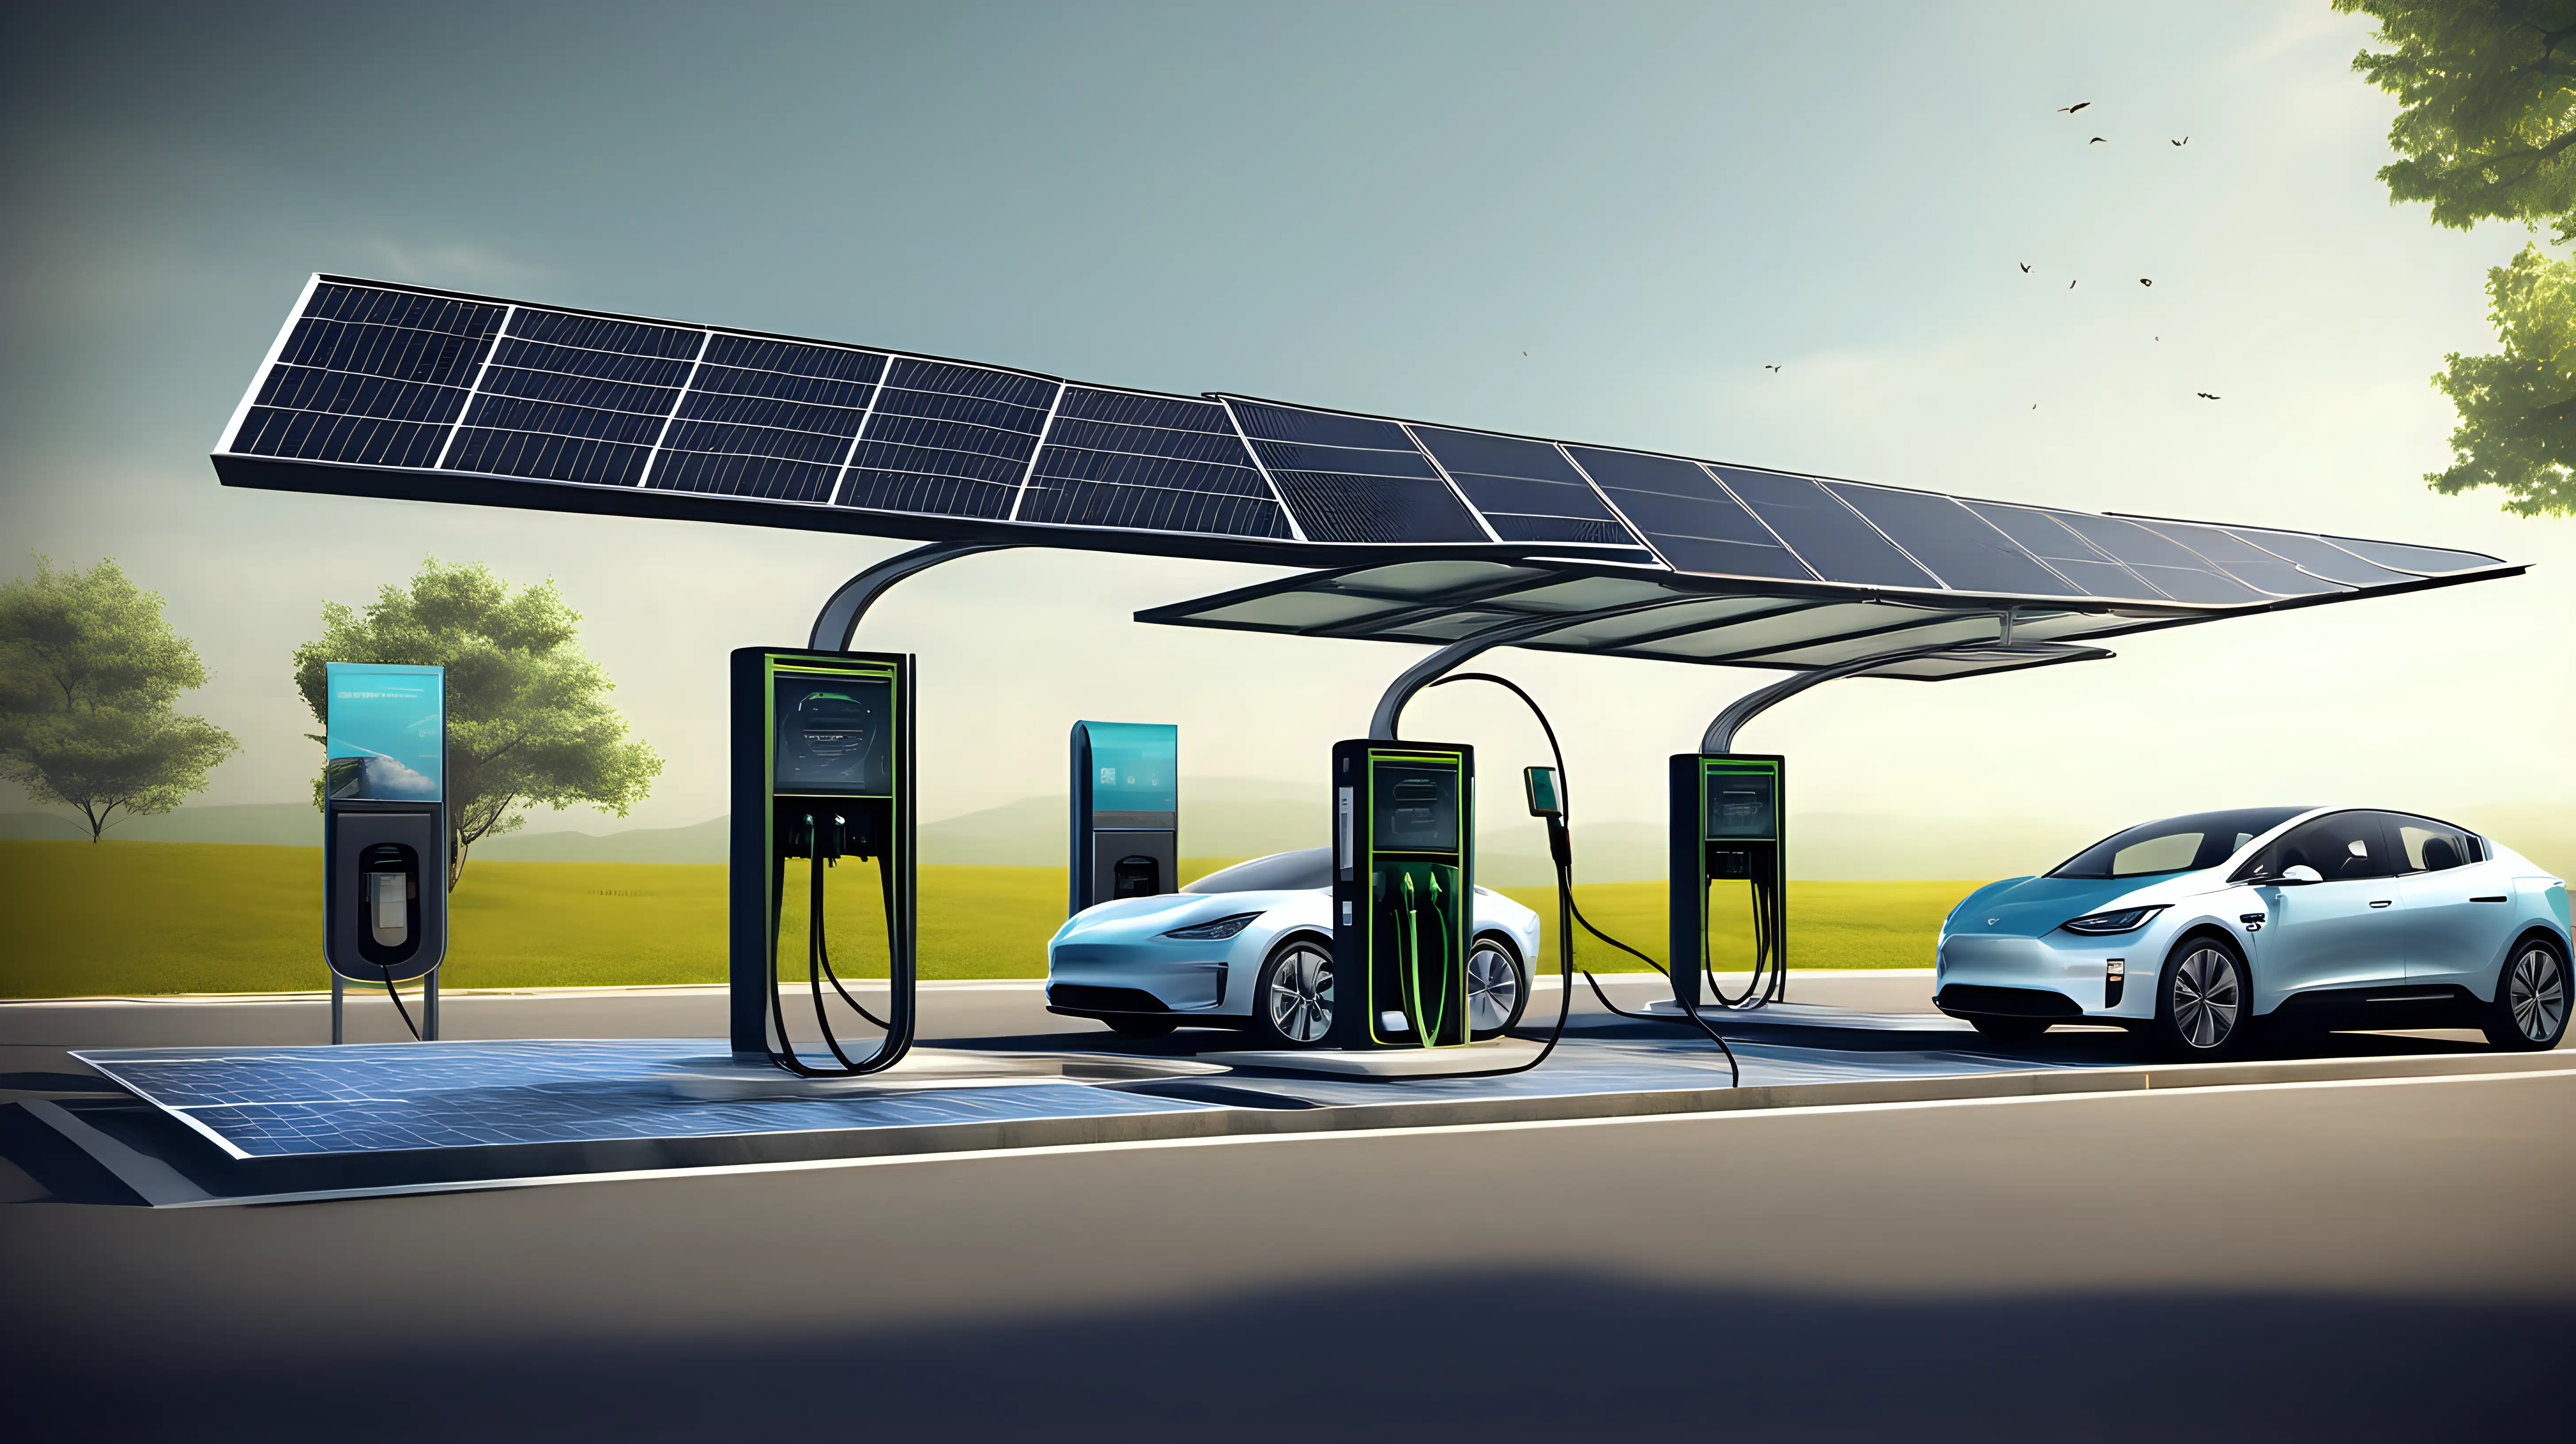 "Generate a visual concept of an electric car charging station powered by solar panels, emphasizing the synergy between renewable energy and sustainable transportation."